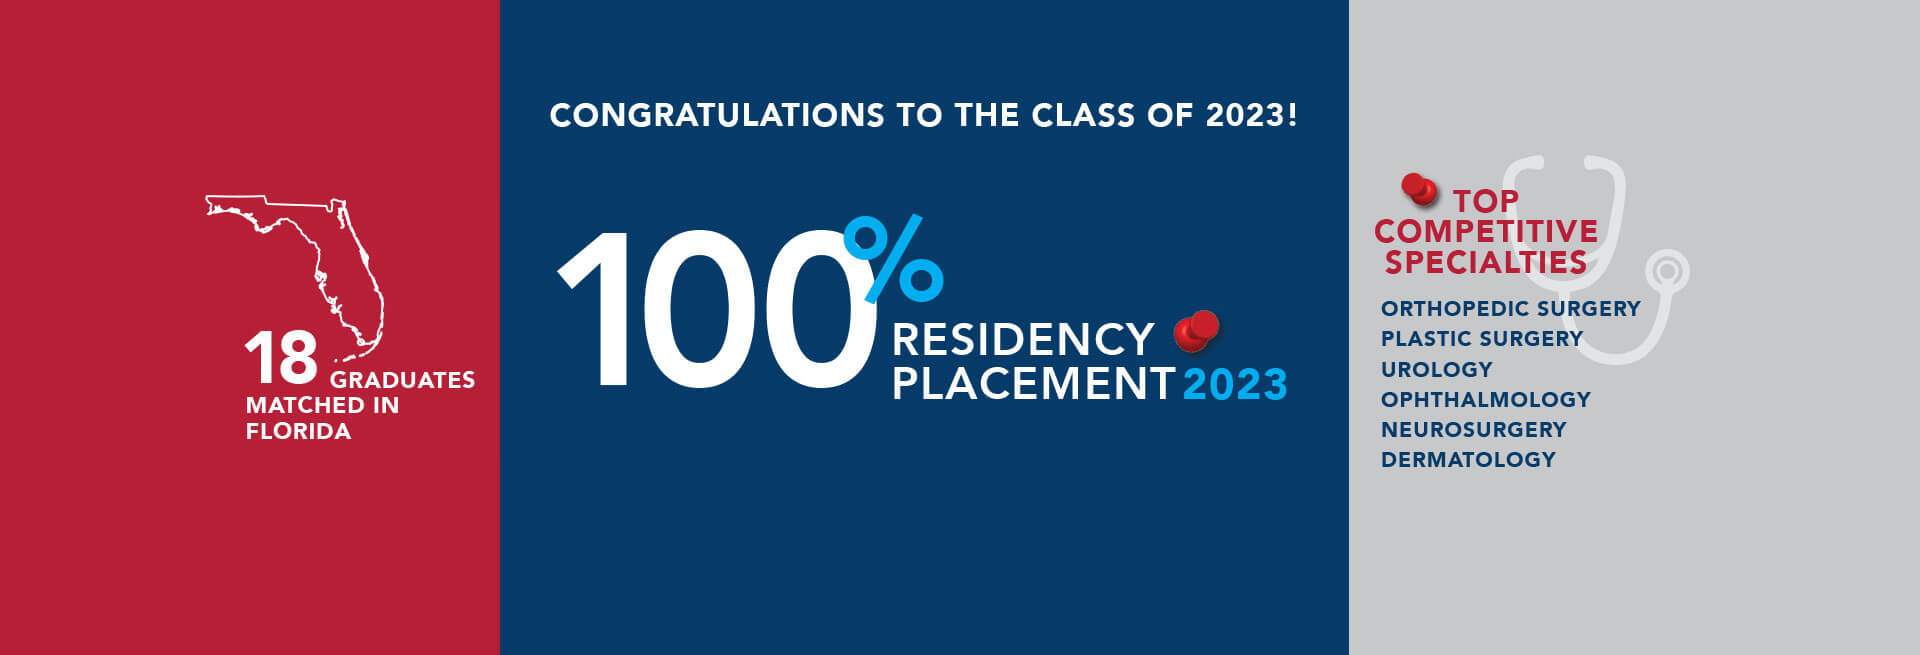 Congratulations to the Class of 2023 - 100% Residency Placement, 18 grads matched in Florida!